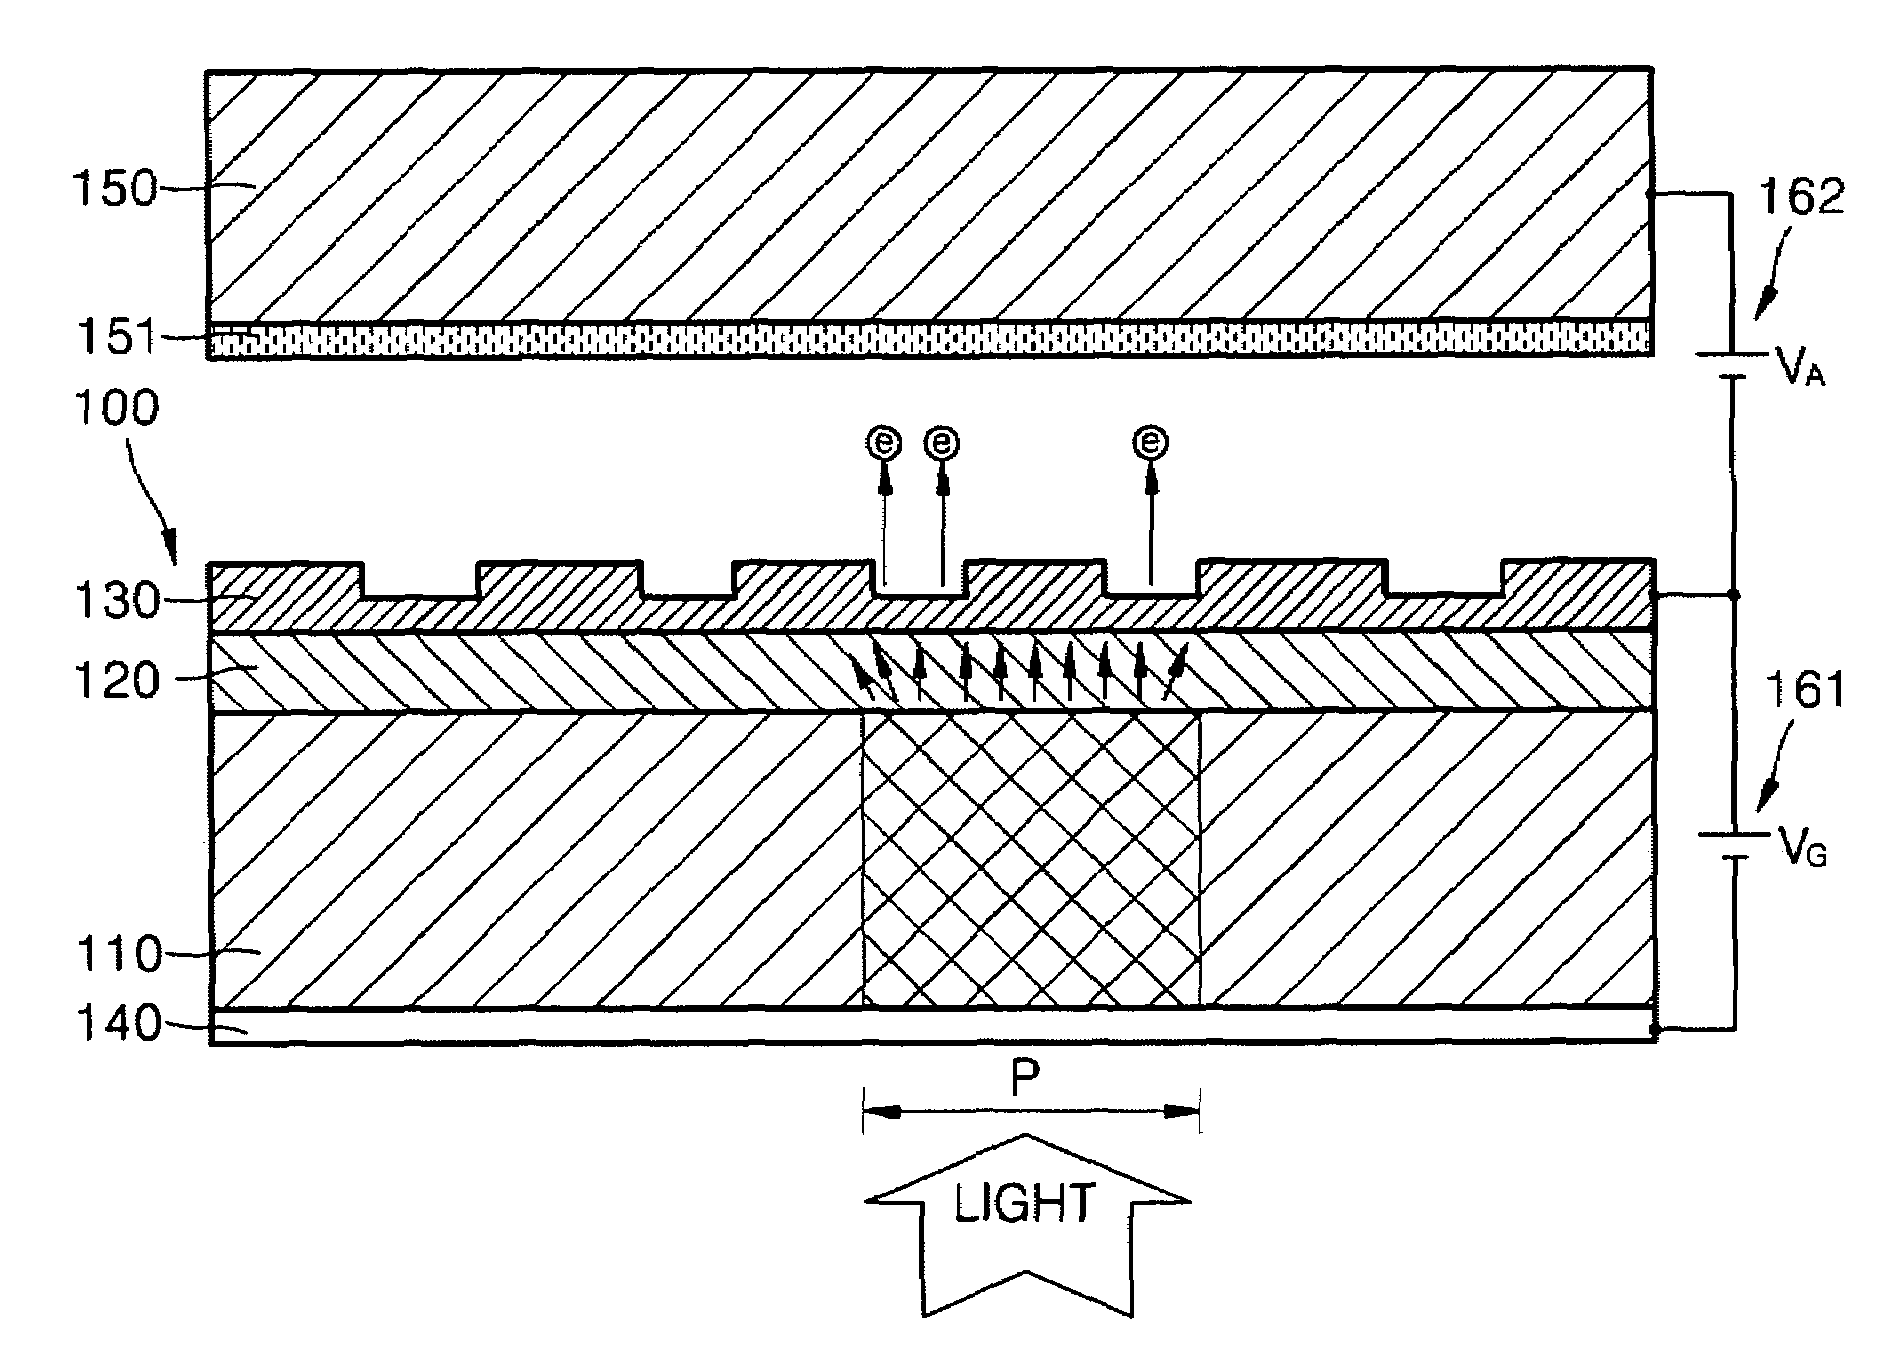 Emitter for electron-beam projection lithography system, and method of manufacturing and operating the emitter